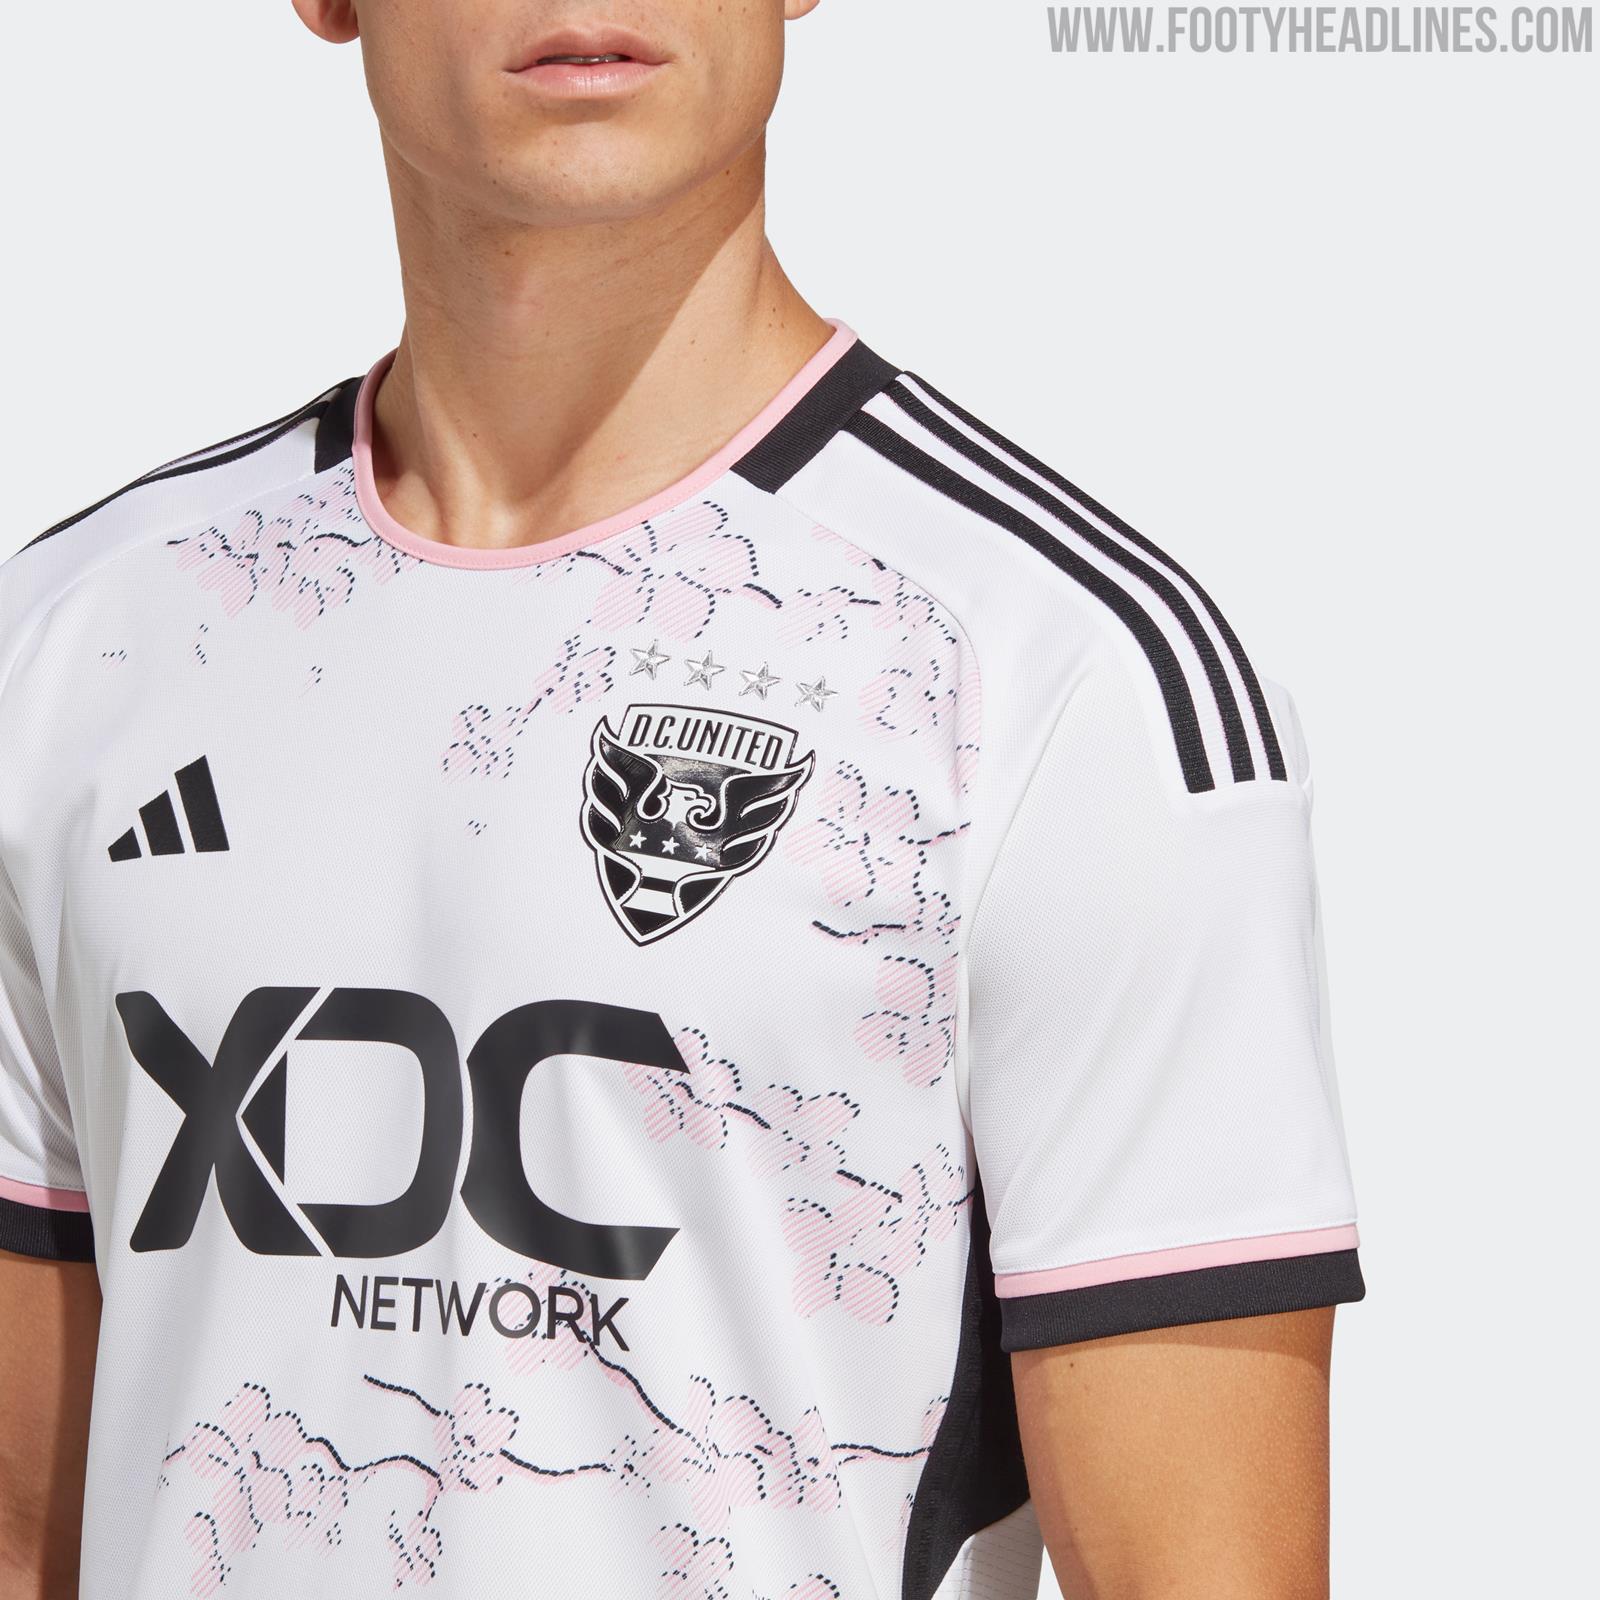 D.C. United unveils cherry blossom-themed uniforms designed by Adidas - The  Washington Post